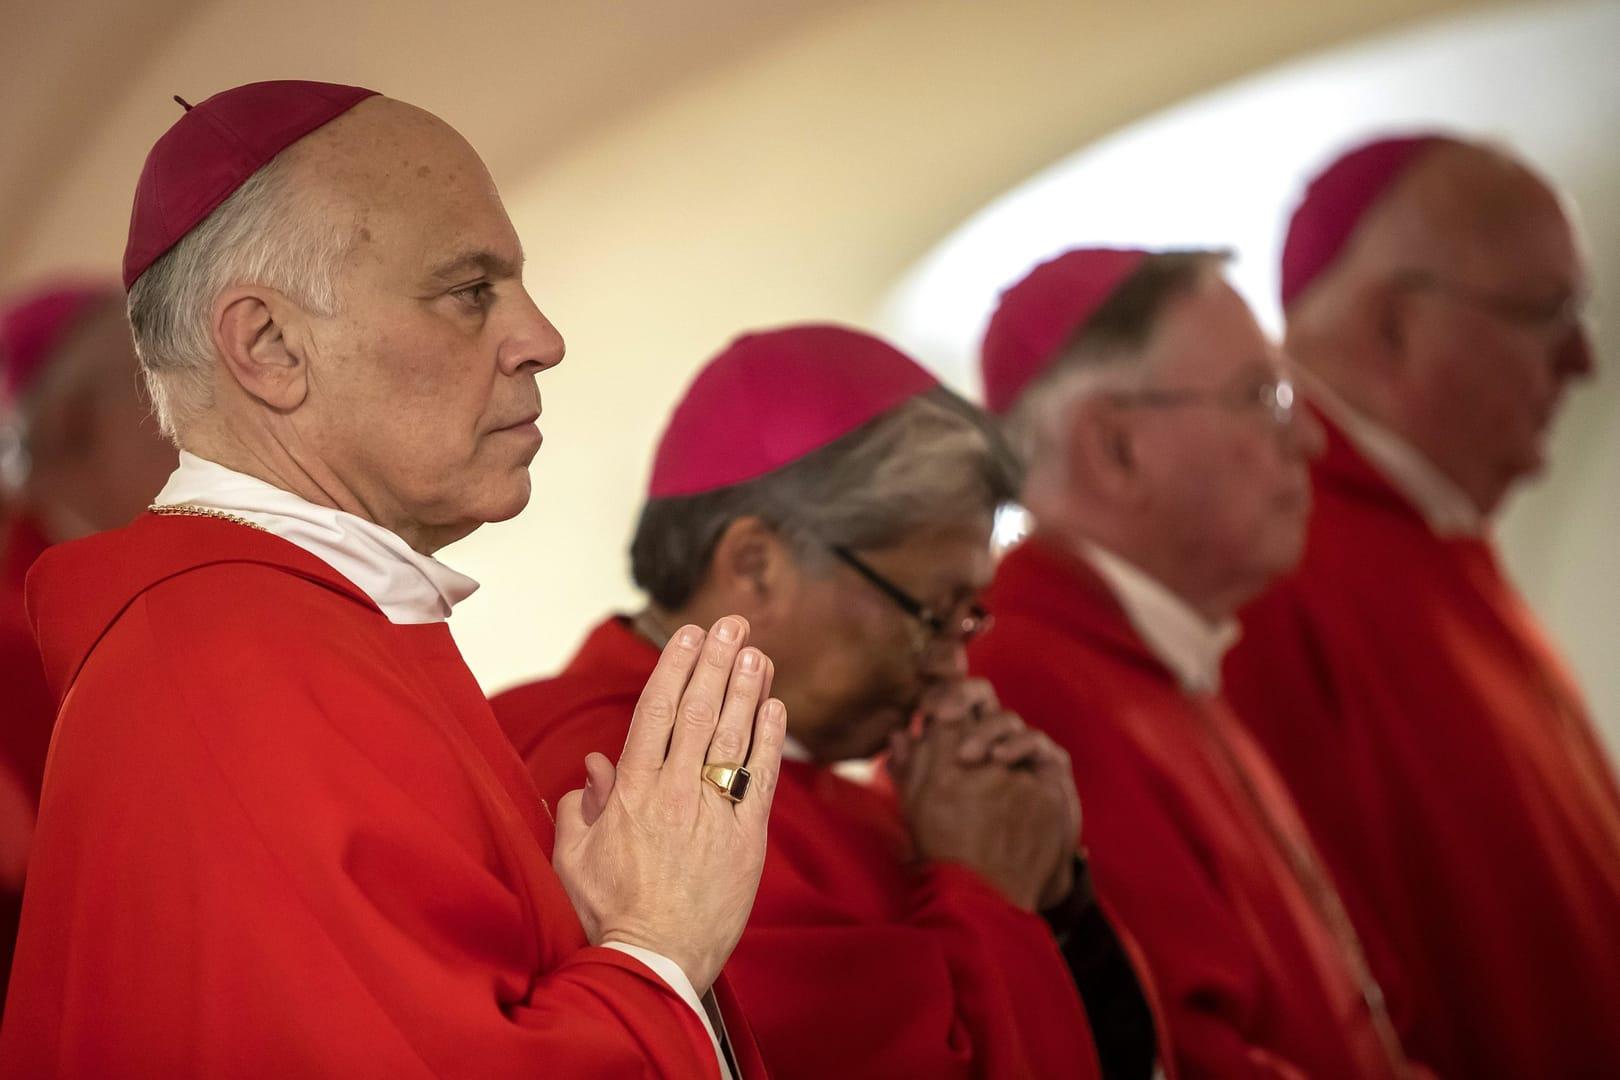 SF Archbishop: Catholics’ right to worship ‘unjustly repressed’ by government